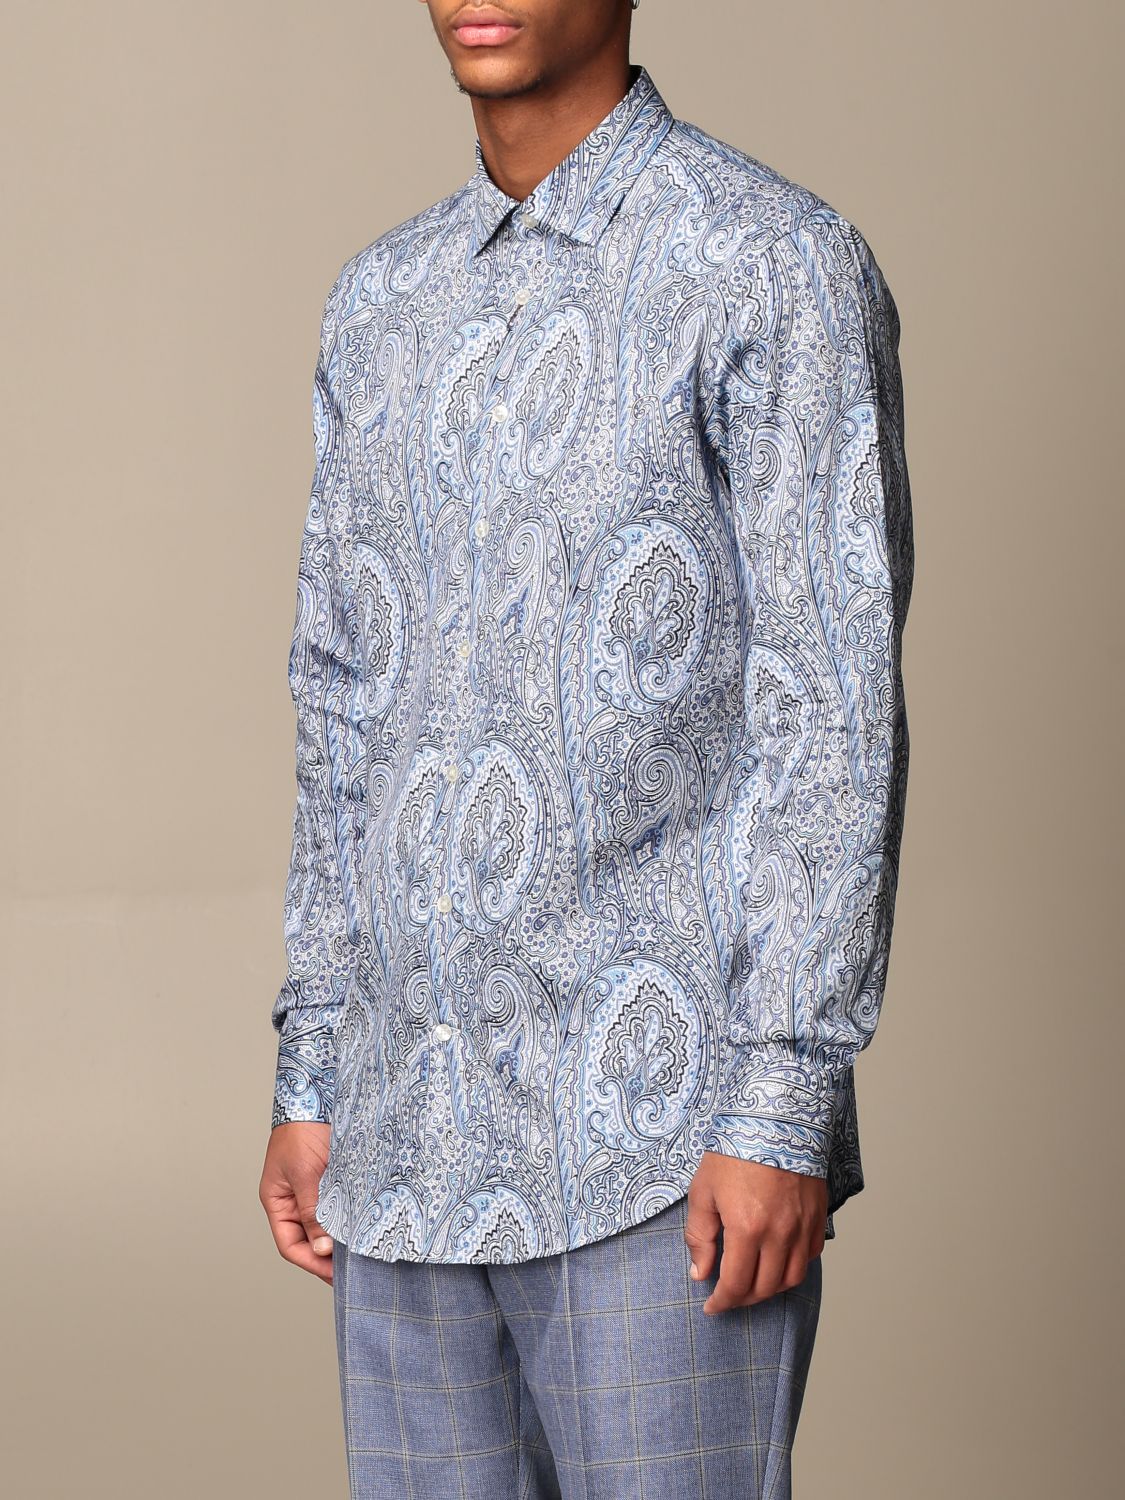 Etro classic shirt in Paisley cotton